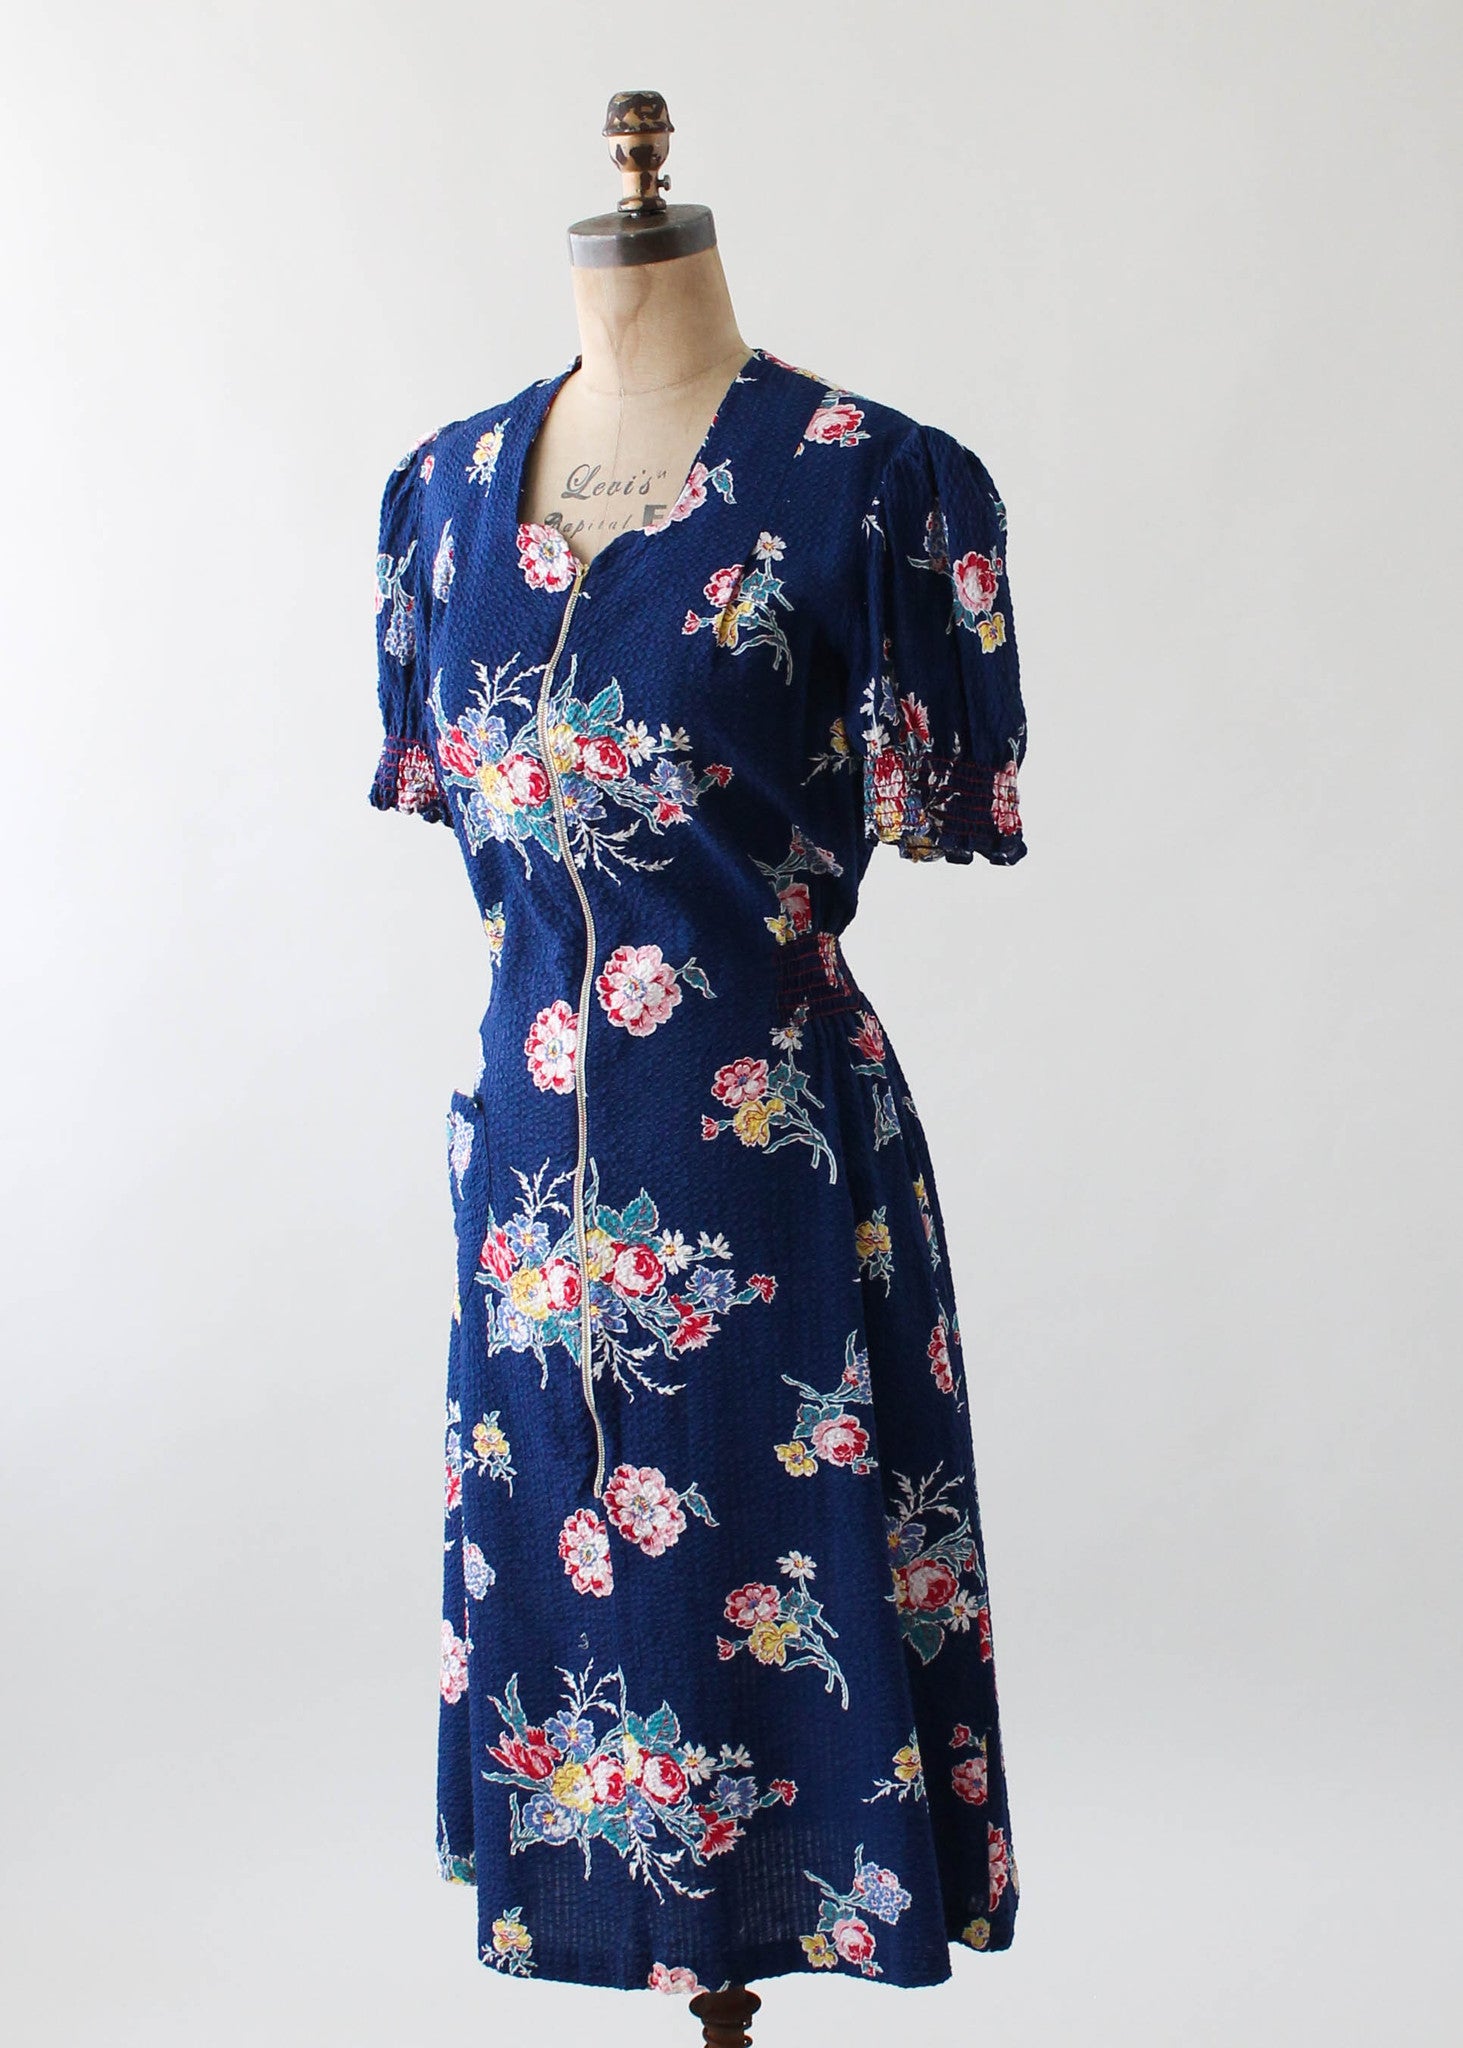 Vintage 1940s Floral Cotton Zip Front Day Dress - Raleigh Vintage